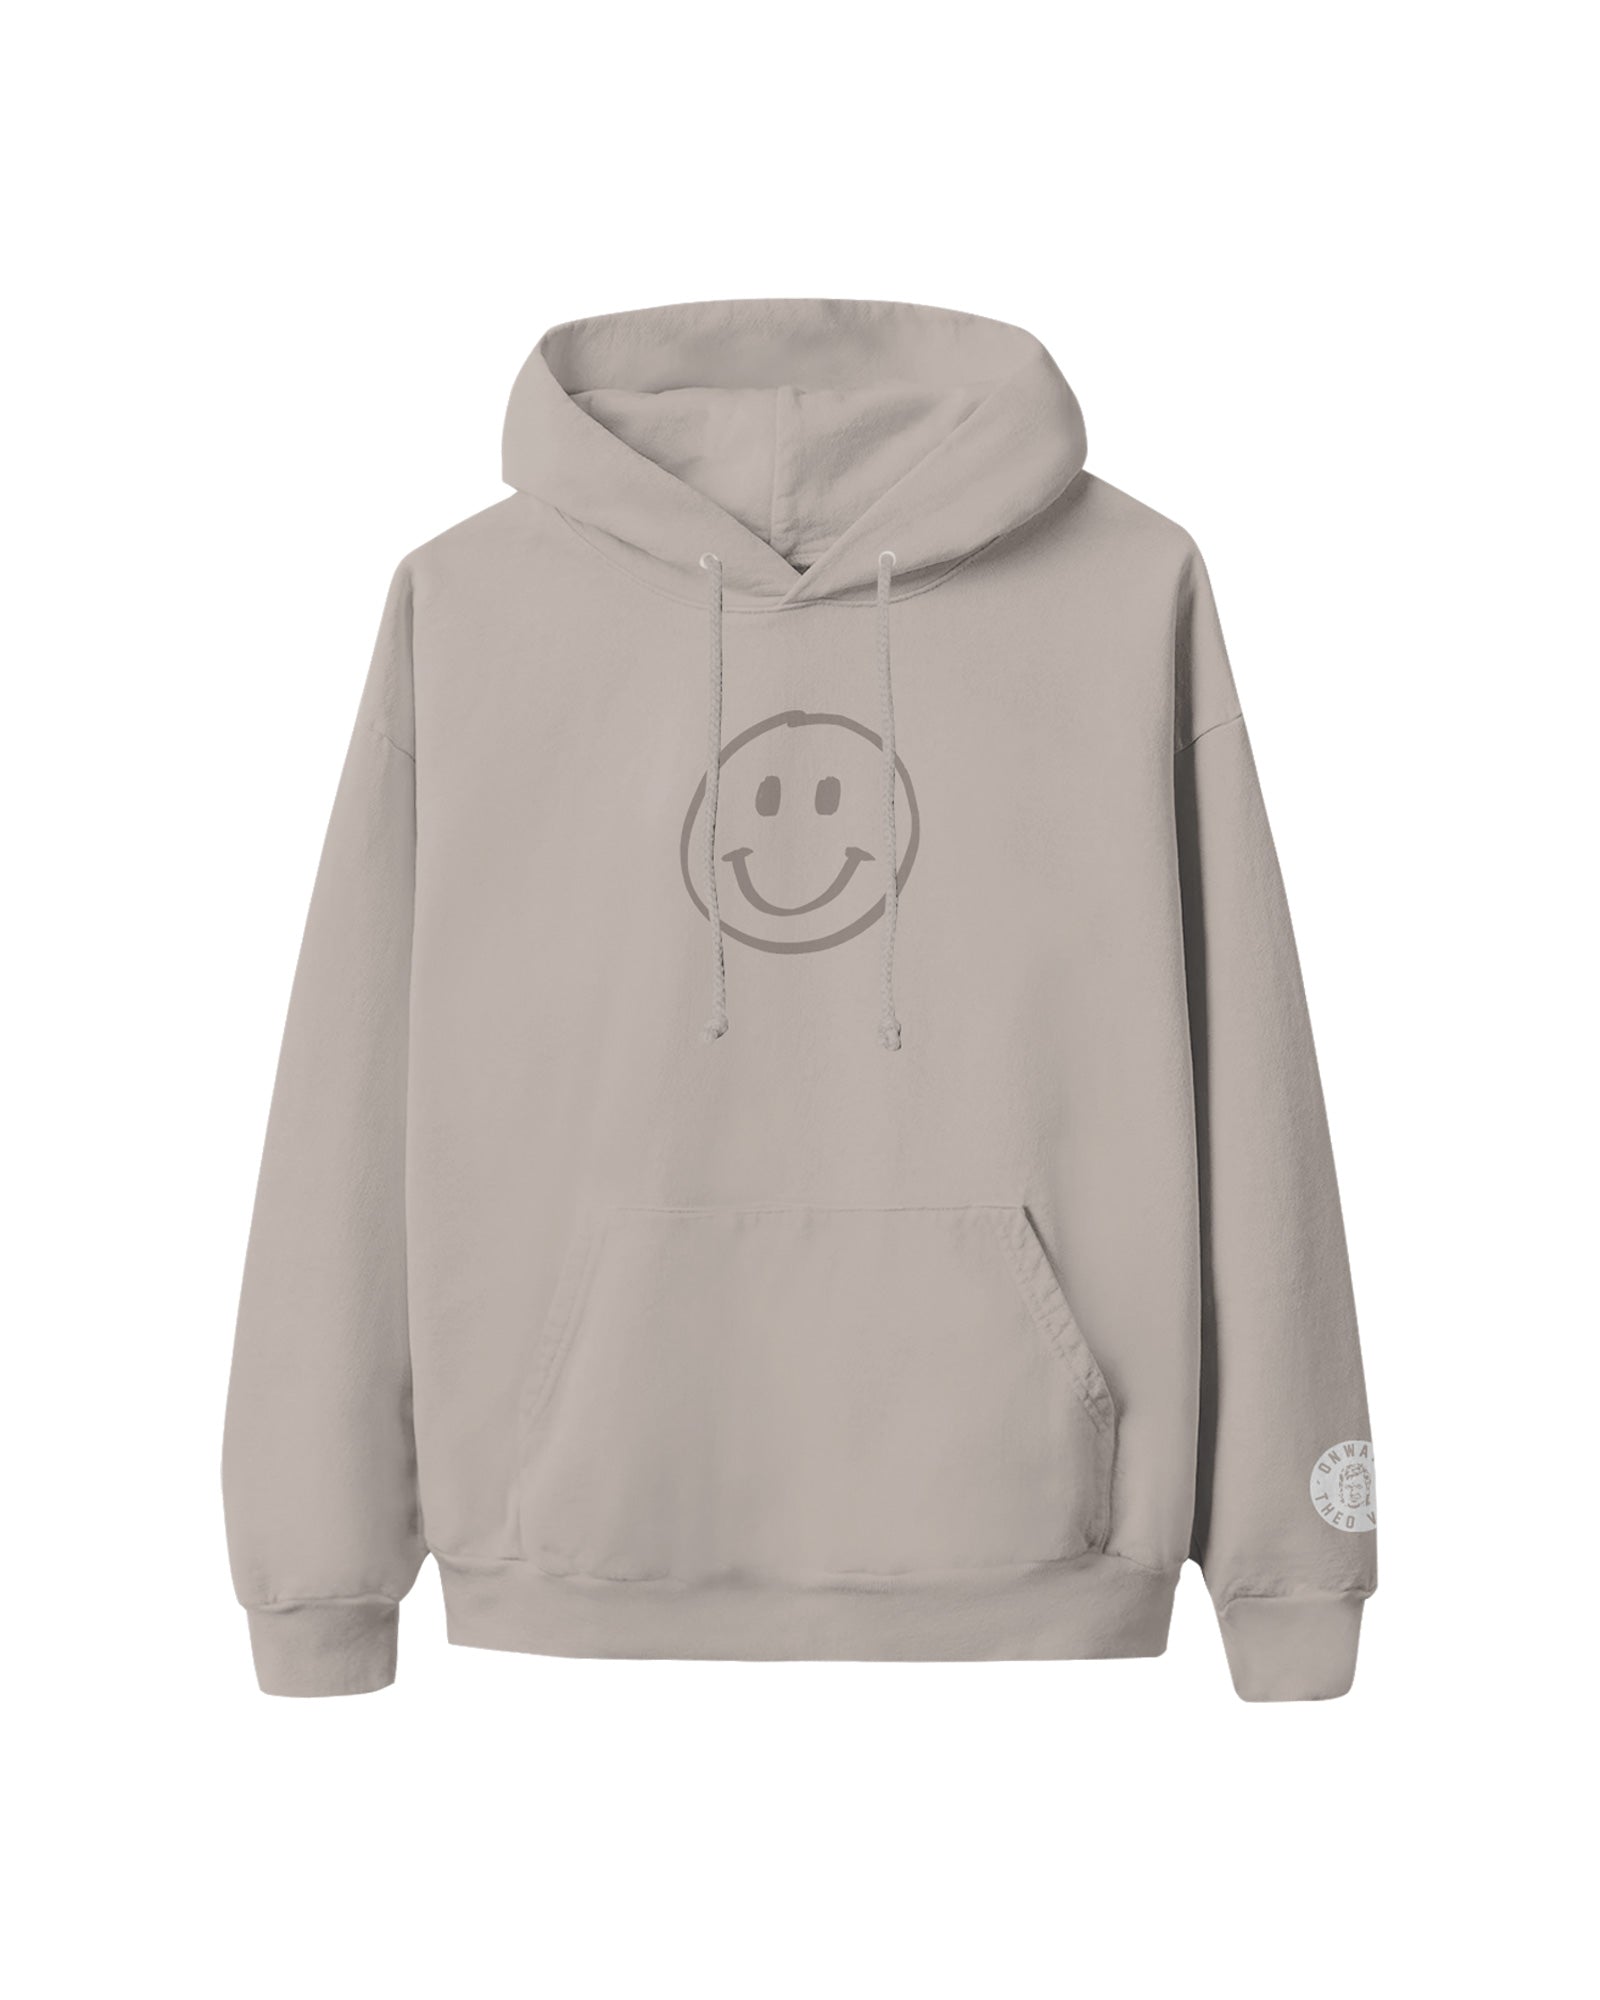 Be Good To Yourself Cement Hoodie